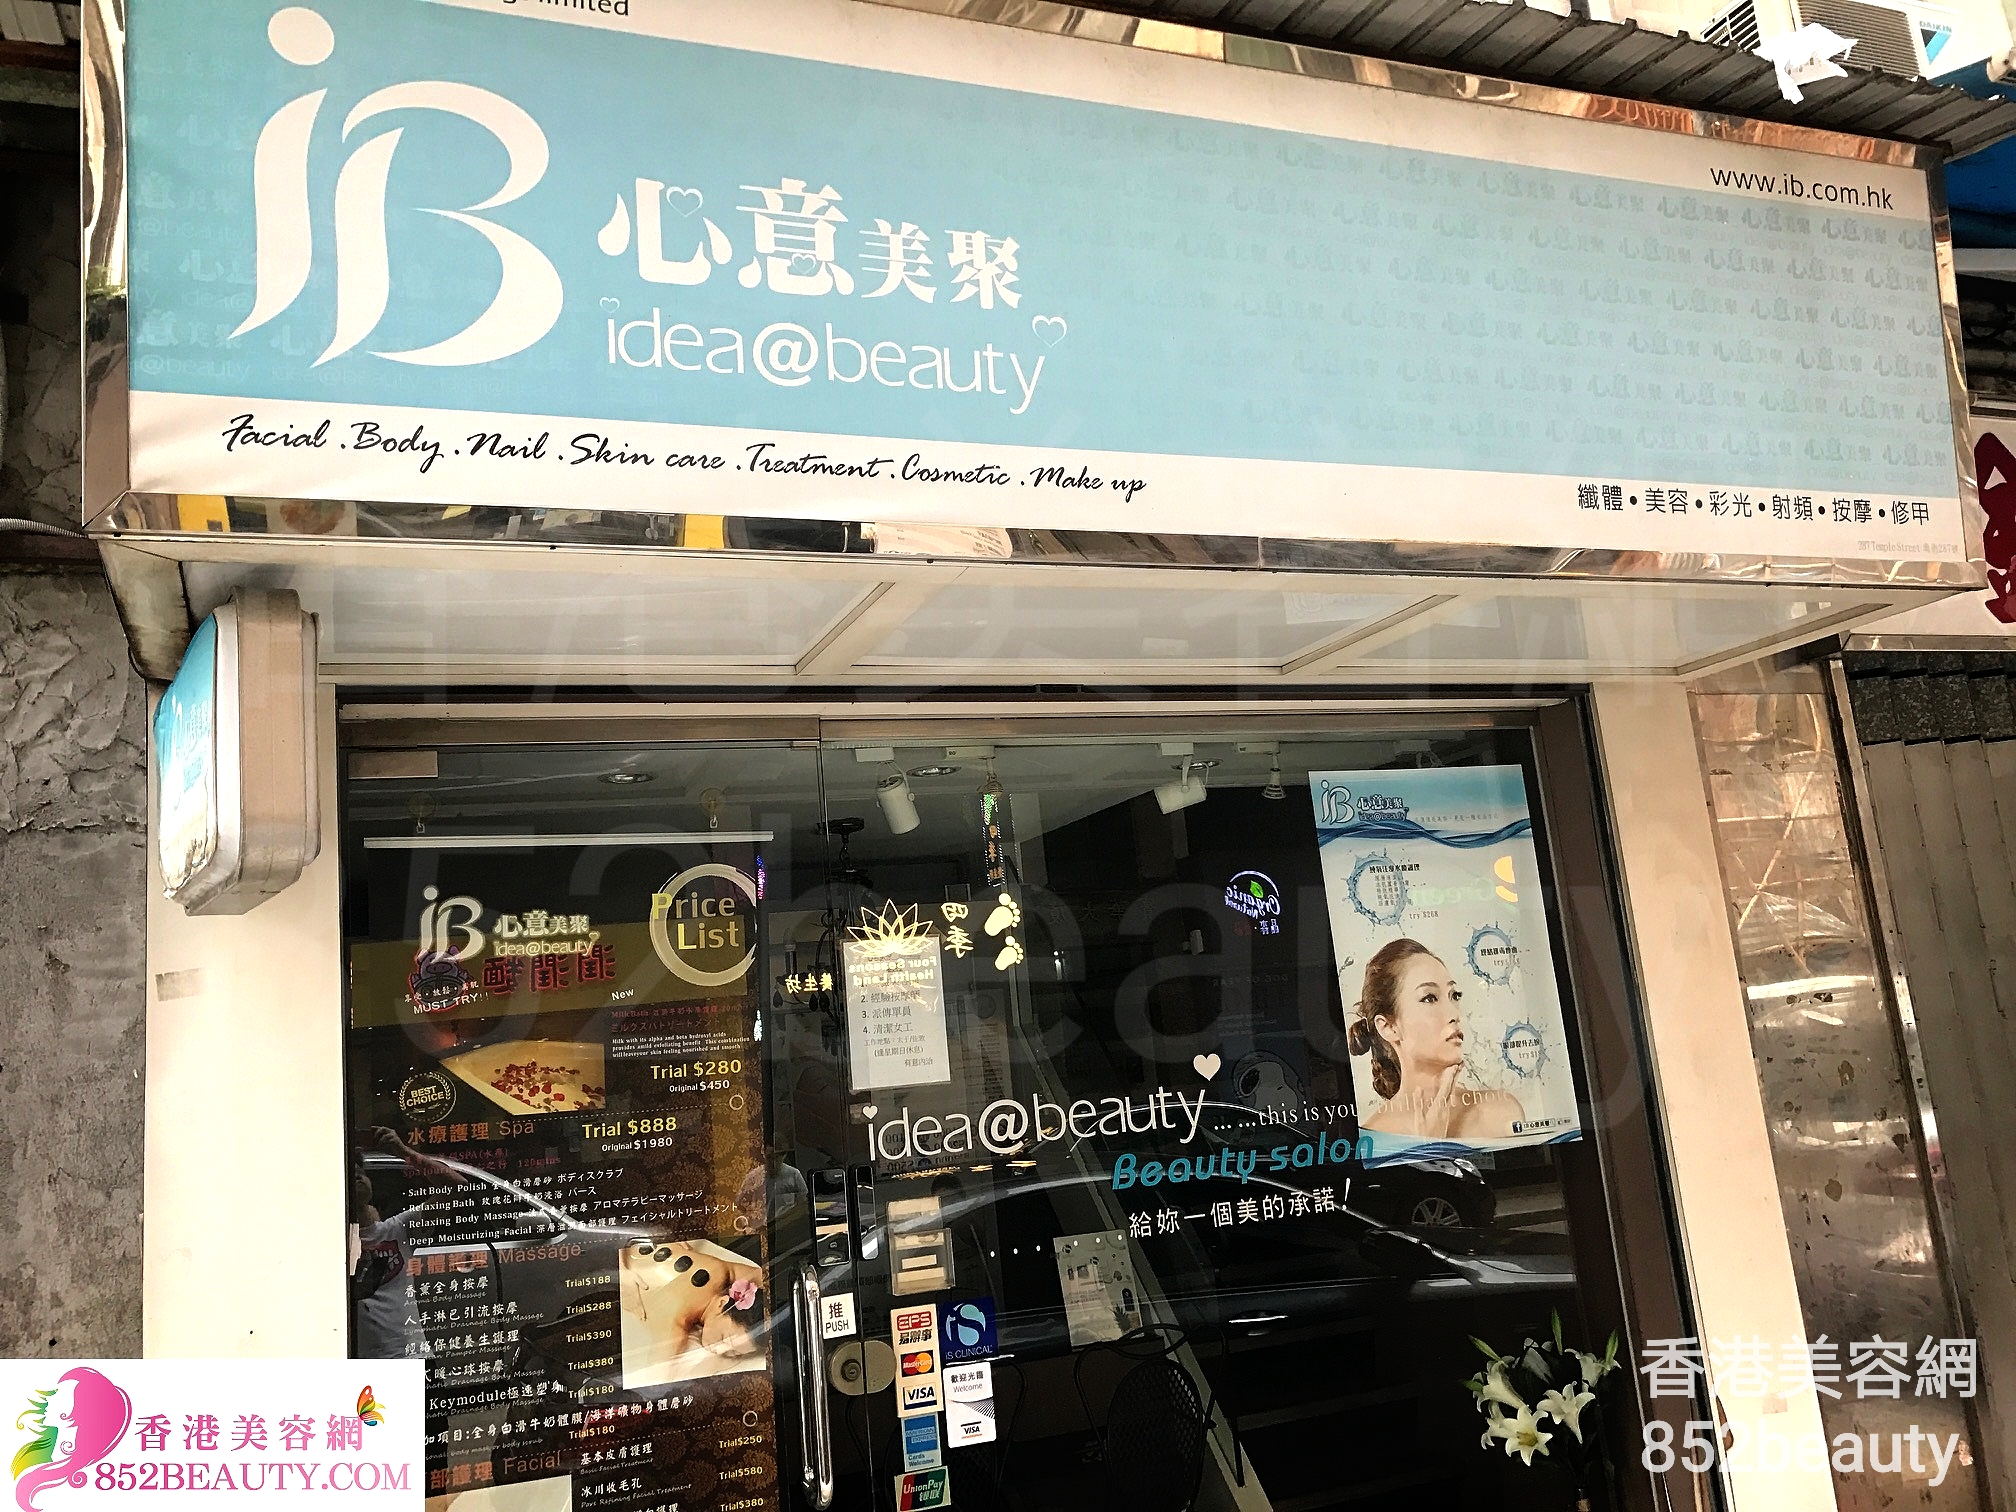 Hand and foot care: ib心意美聚